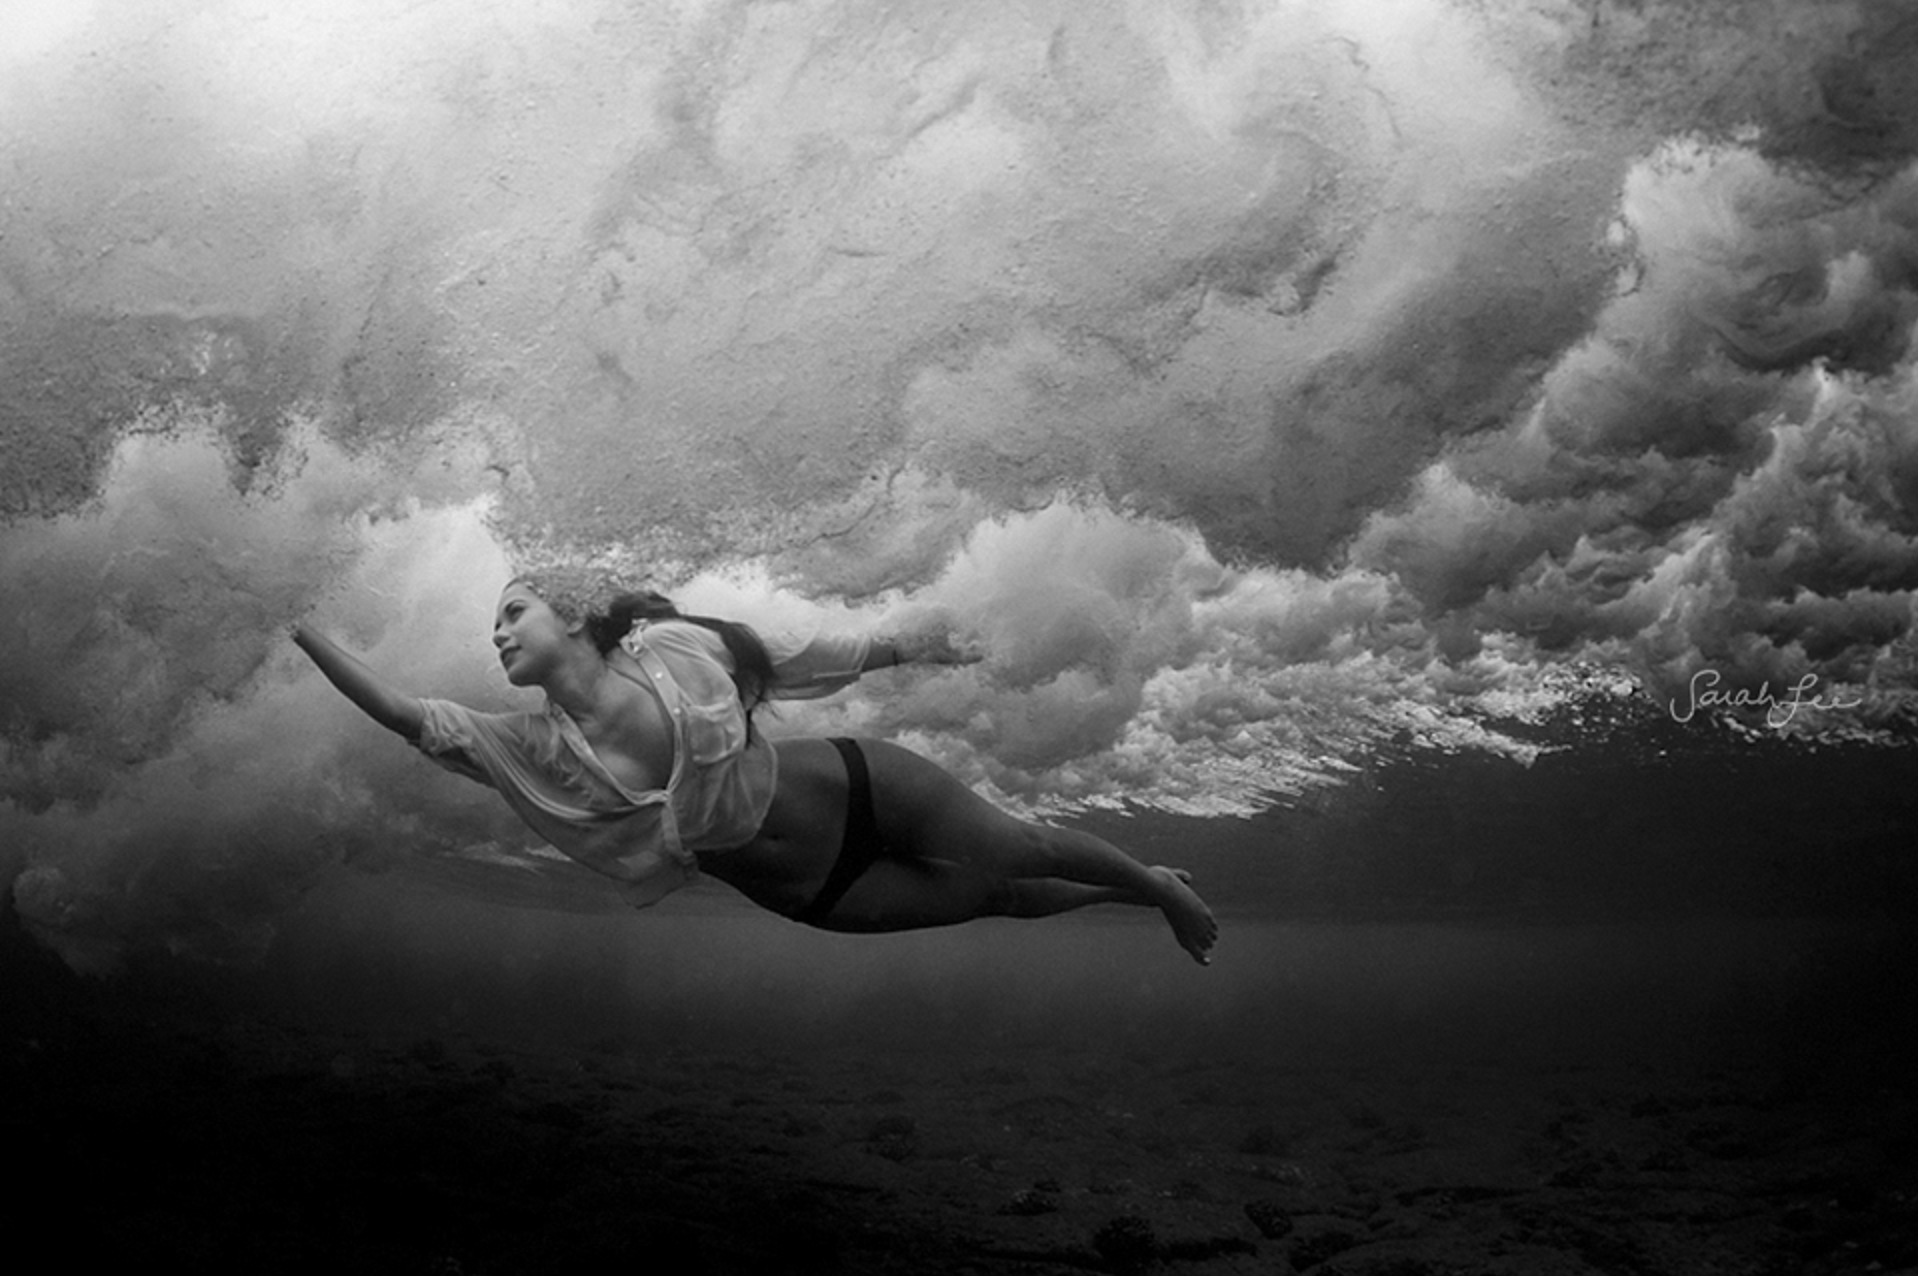 The Beautiful And Surreal Sensuality Of Sarah Lee’s Underwater Photos